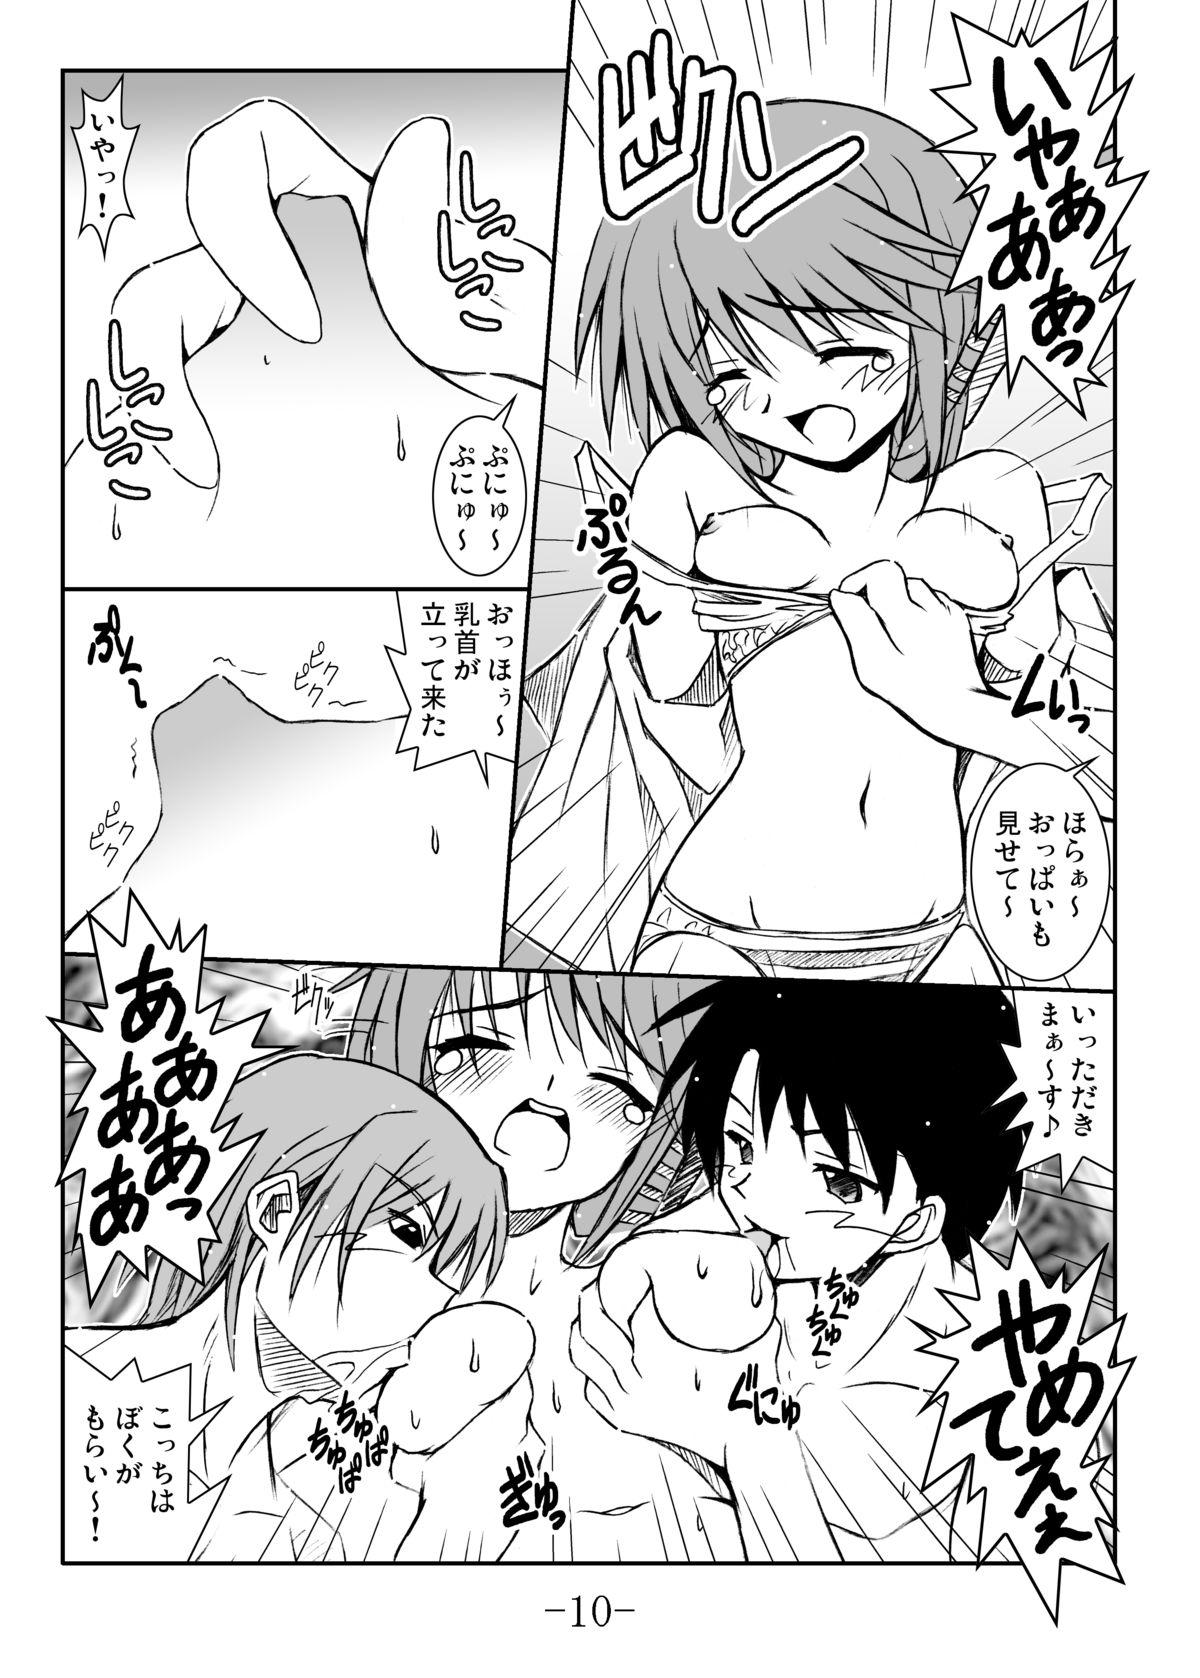 Face GURIMAGA’こまきちっく’ - Toheart2 Boquete - Page 10